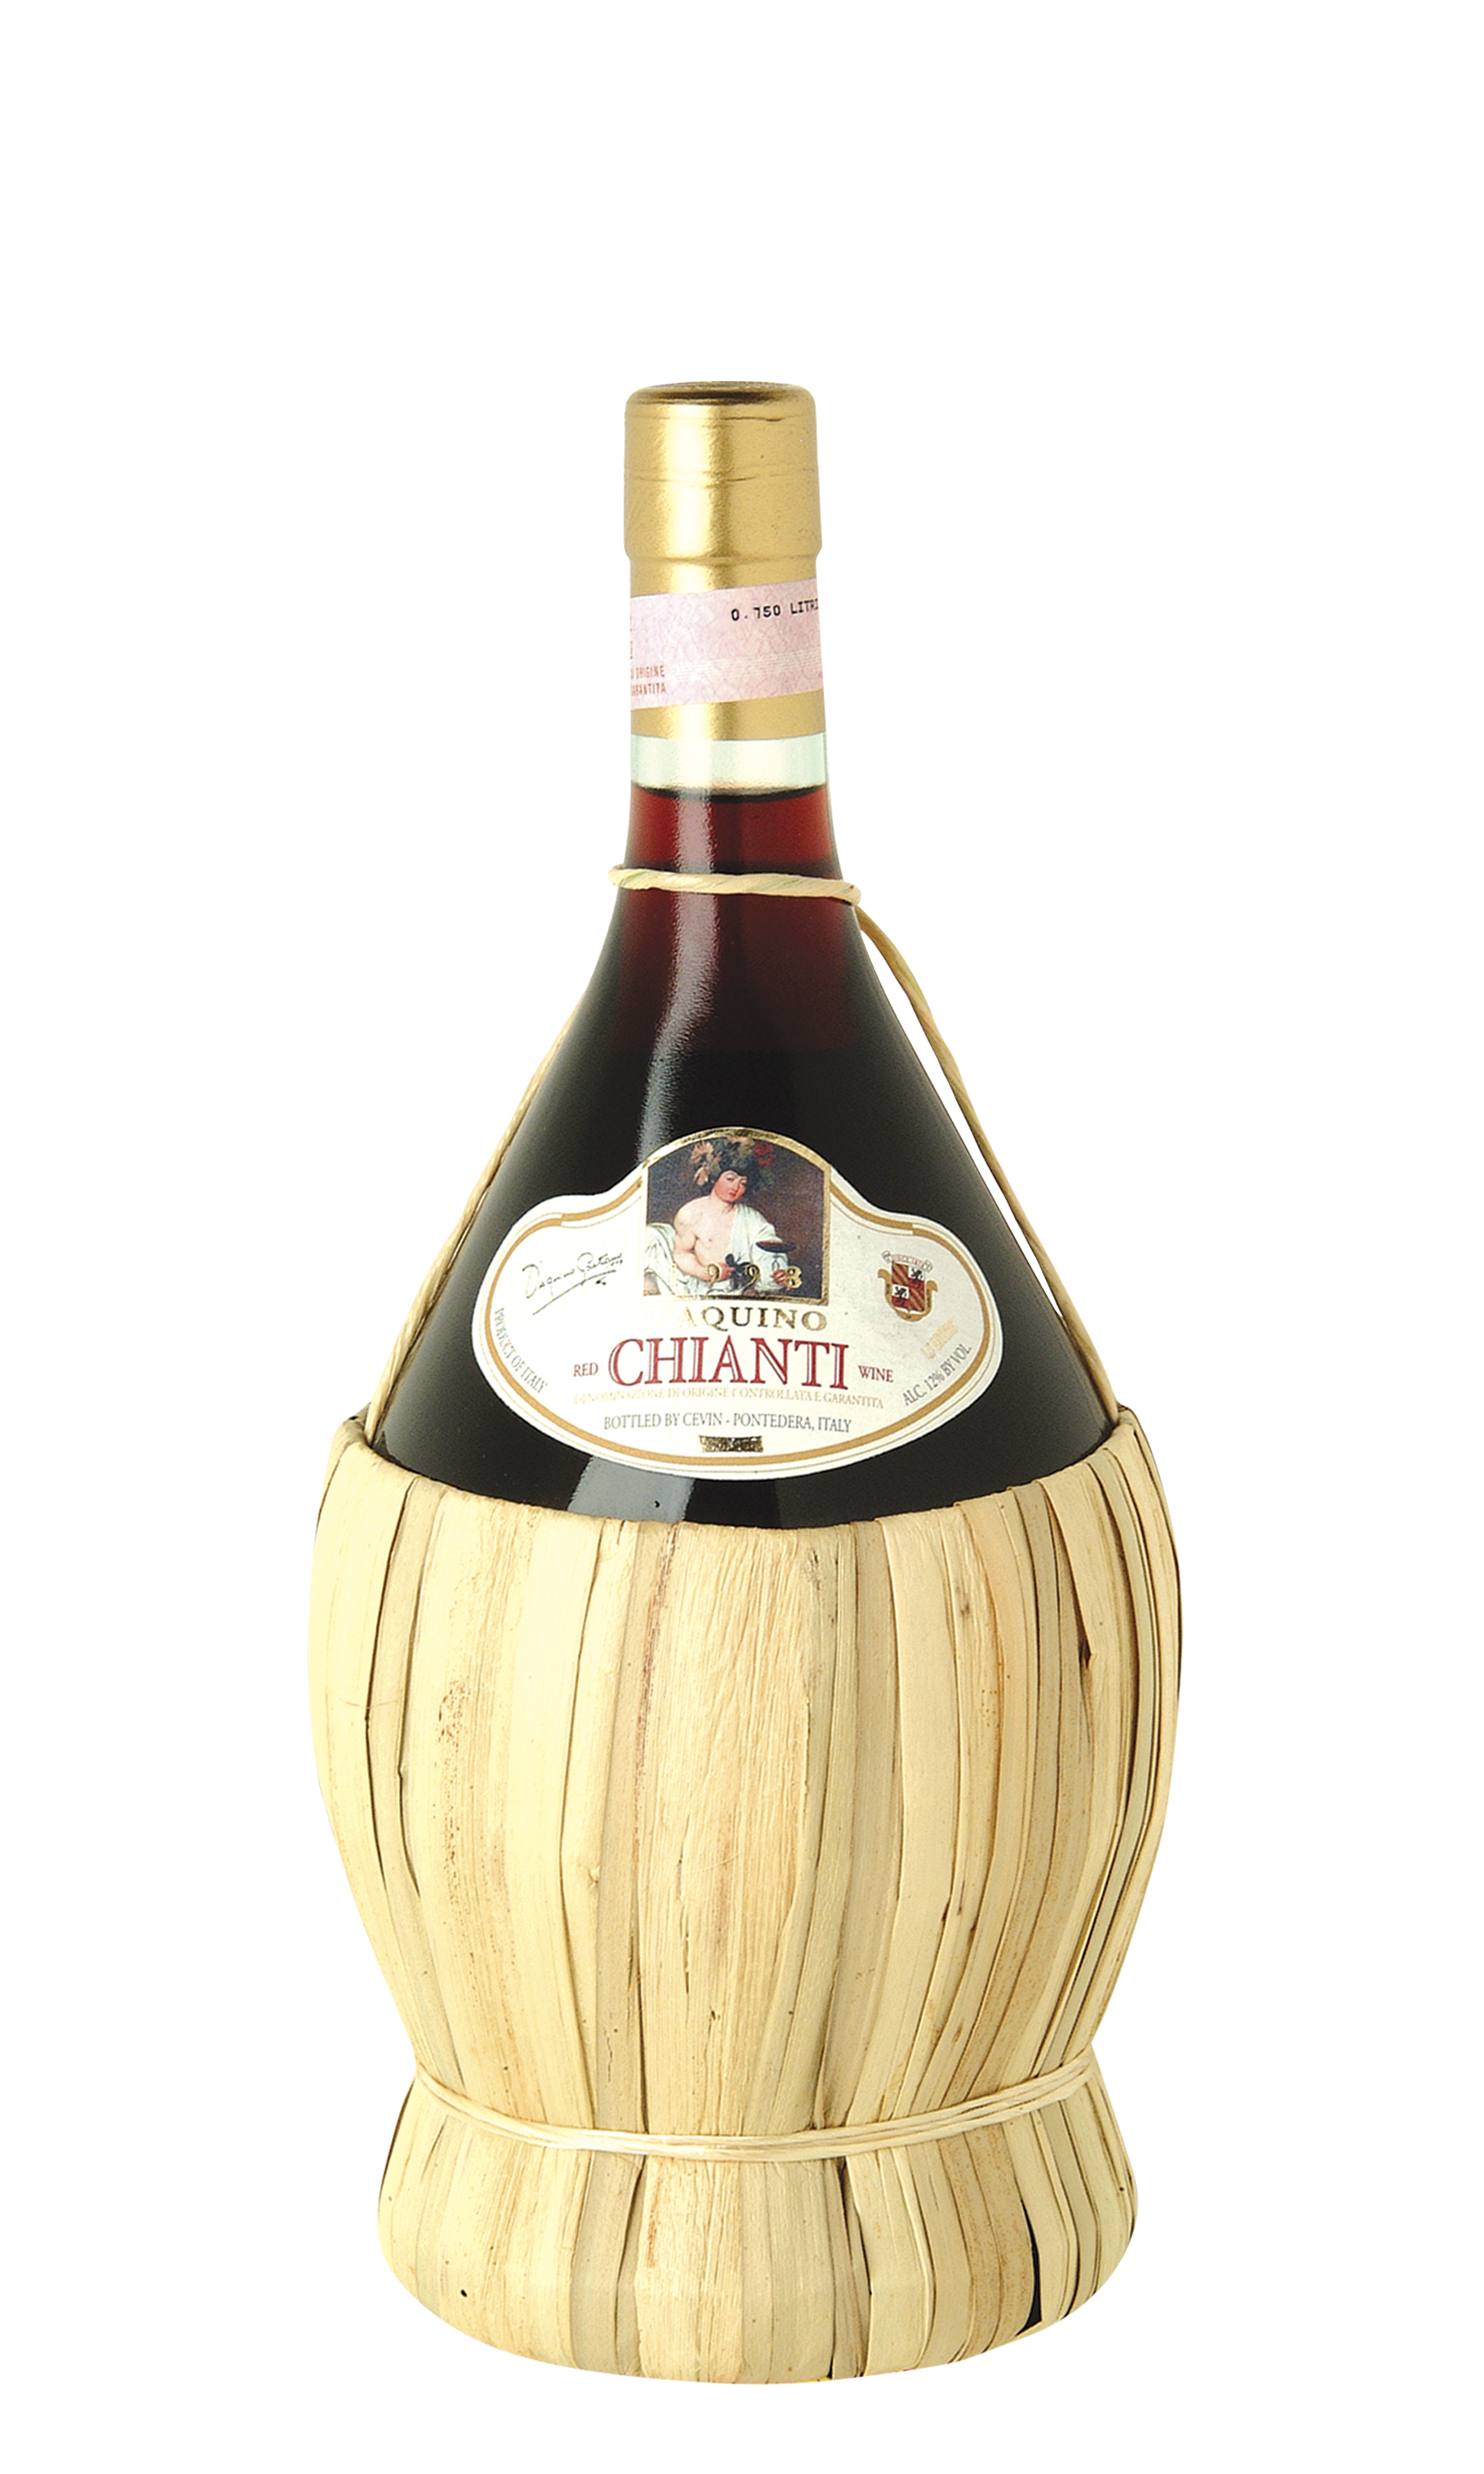 What Is Chianti Wine?